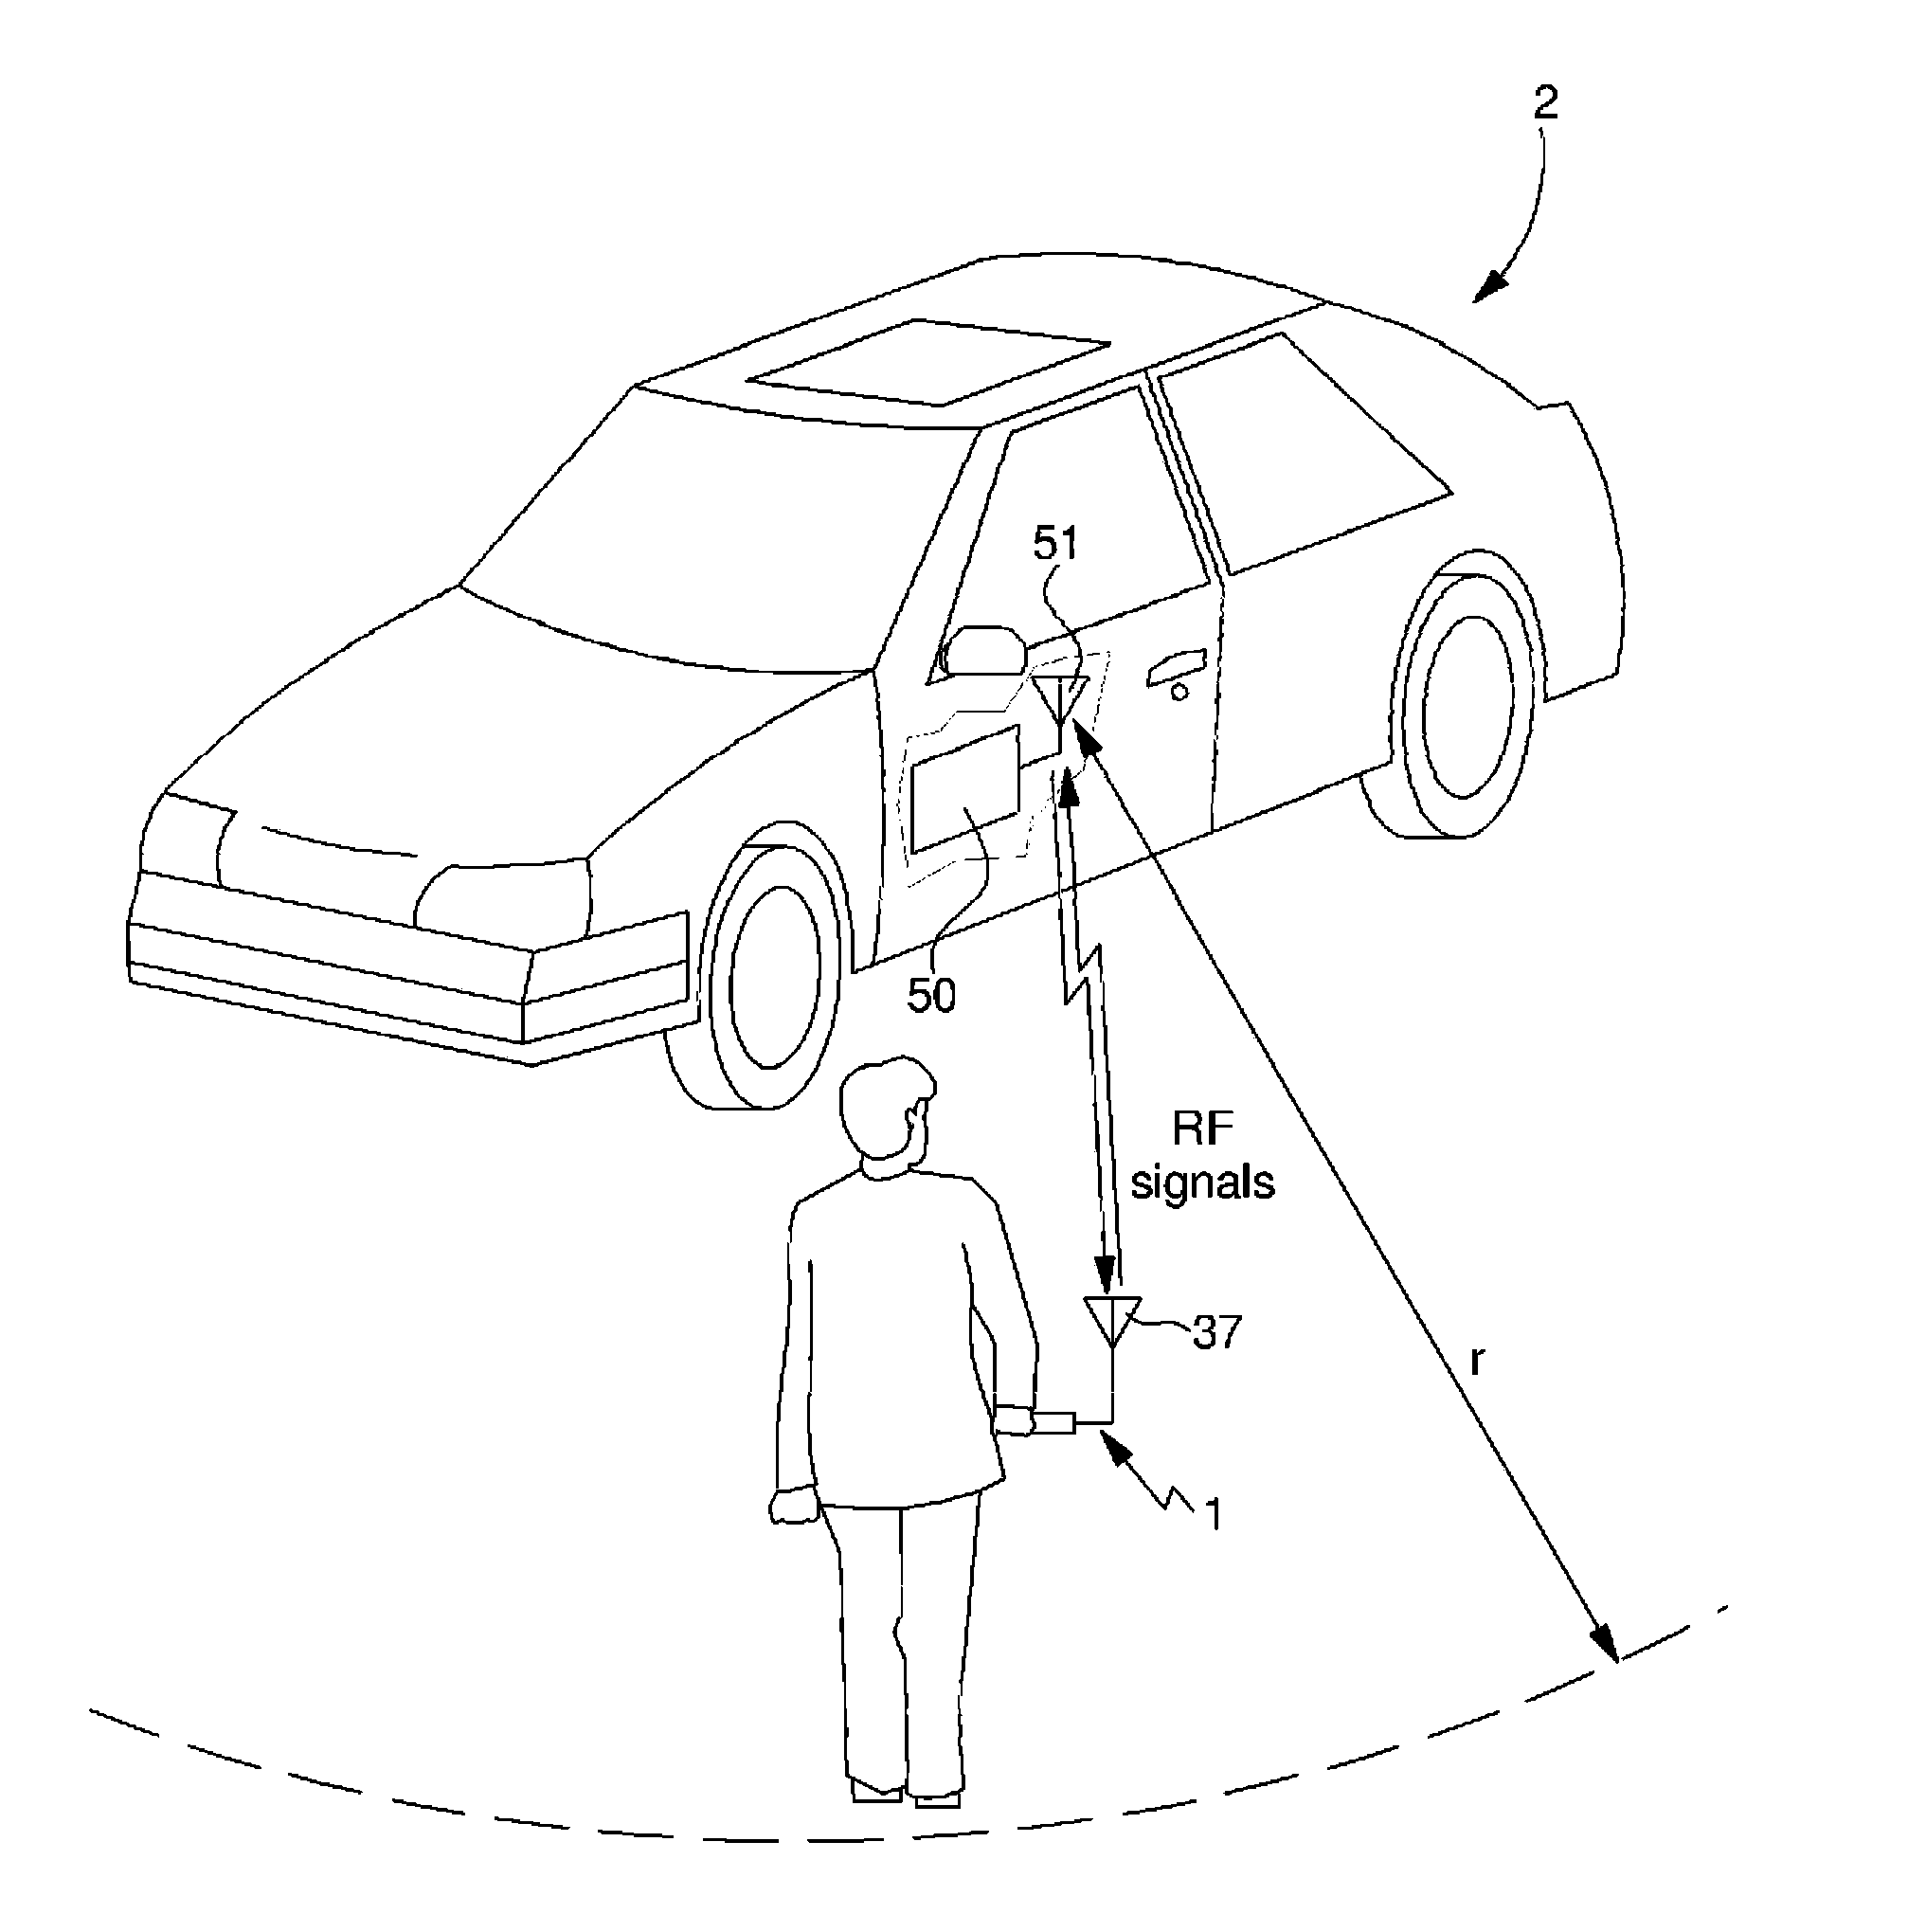 Portable electronic device for controlling and managing functions and/or data of a vehicle